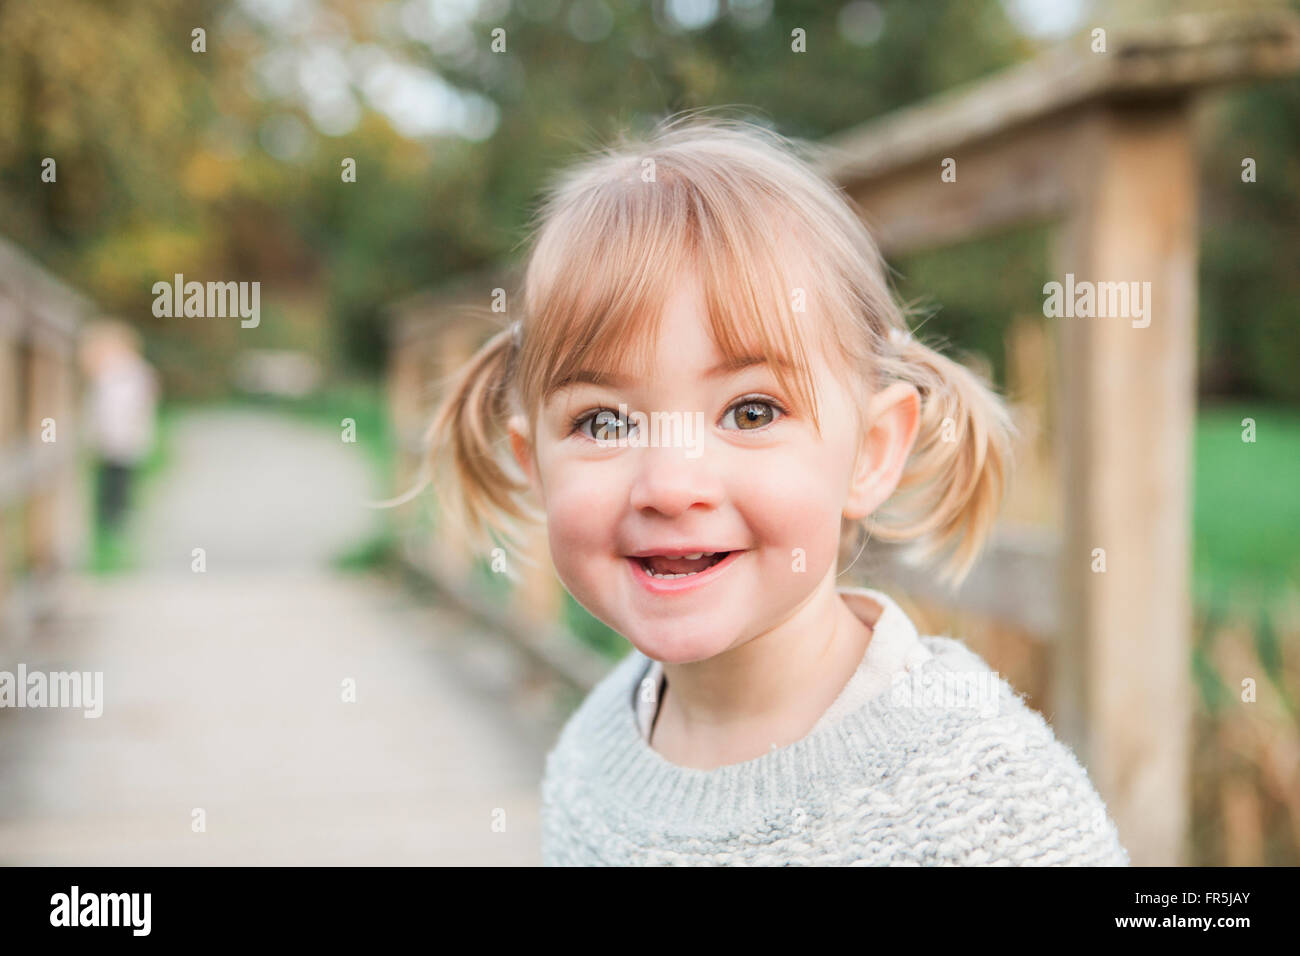 Portrait smiling toddler girl with pigtails Stock Photo